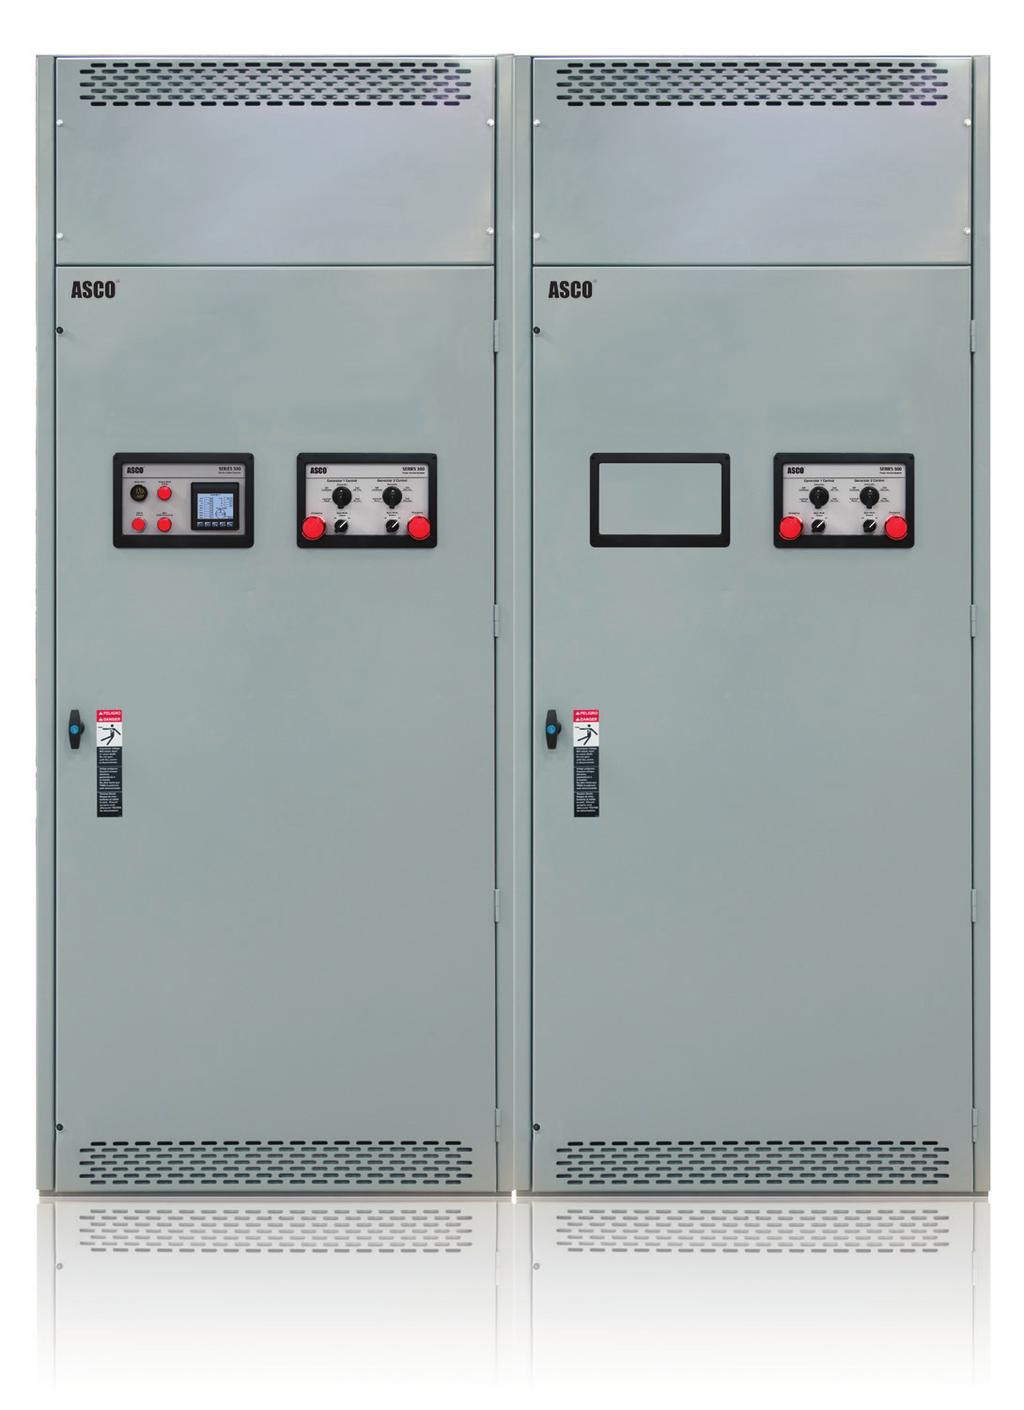 Parallel a Variety of Generators Because the SERIES 300 System controls synchronization and load sharing via bias signals to the voltage regulator and governor, our solution is not limited to